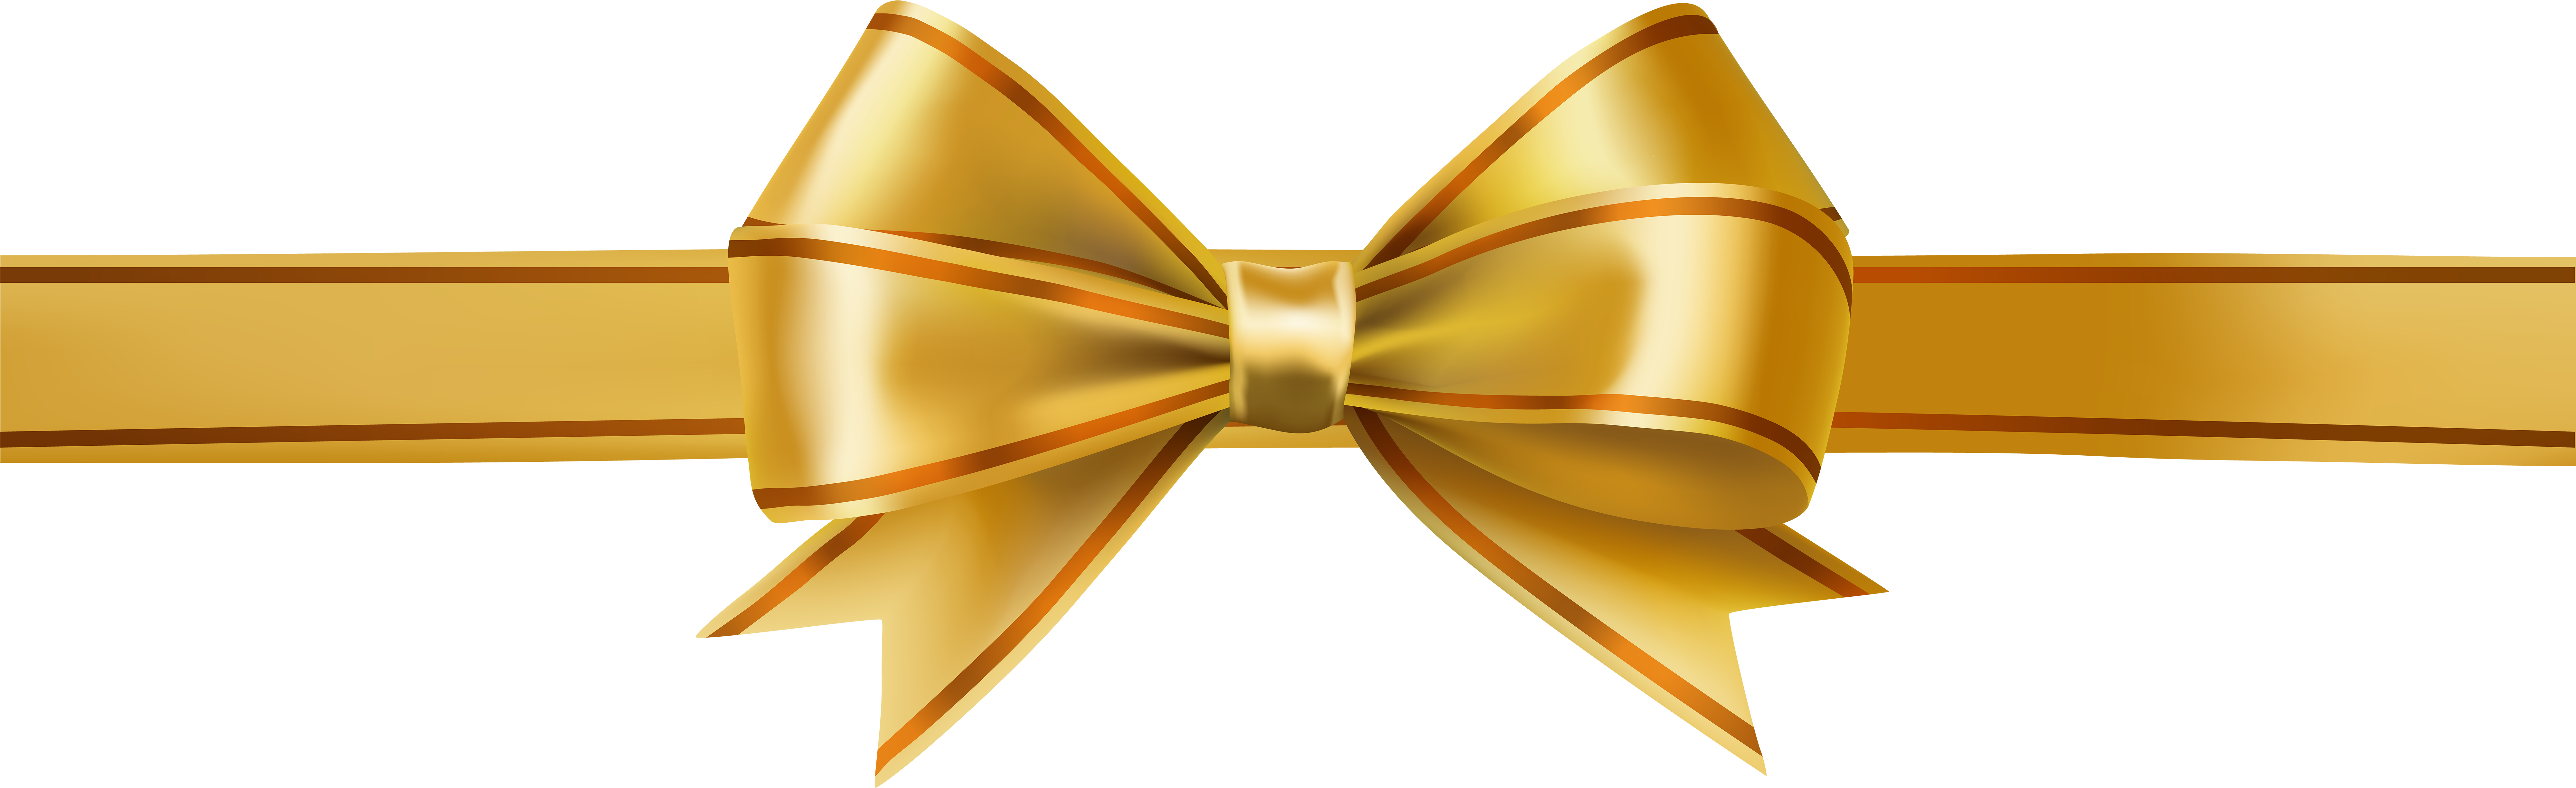 Gold Christmas Bow Clipart - Golden Bow Ribbon Png Transparent Png (8000x2604), Png Download